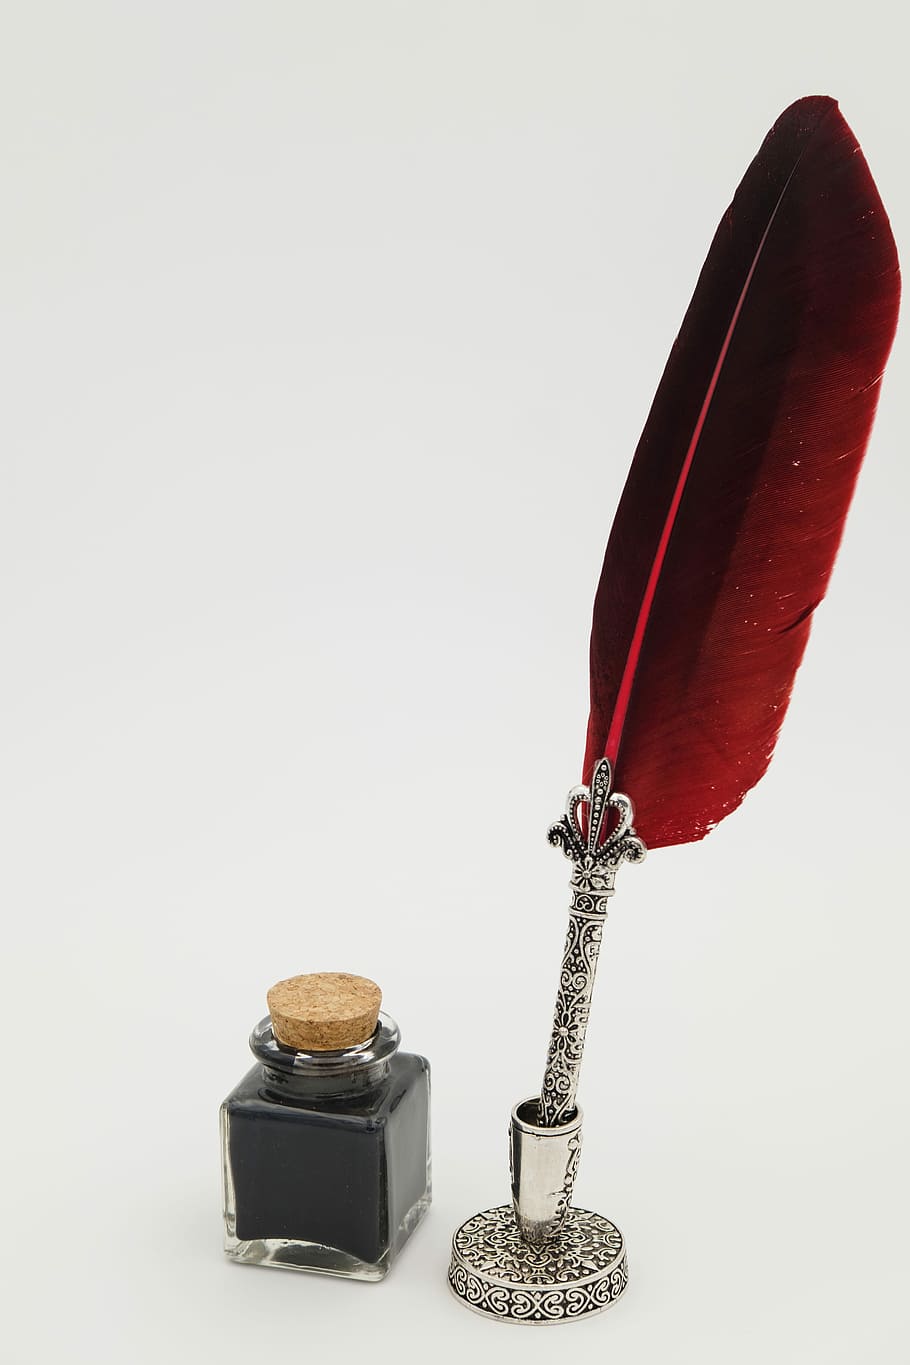 gray and red fountain pen with red feather beside ink bottle